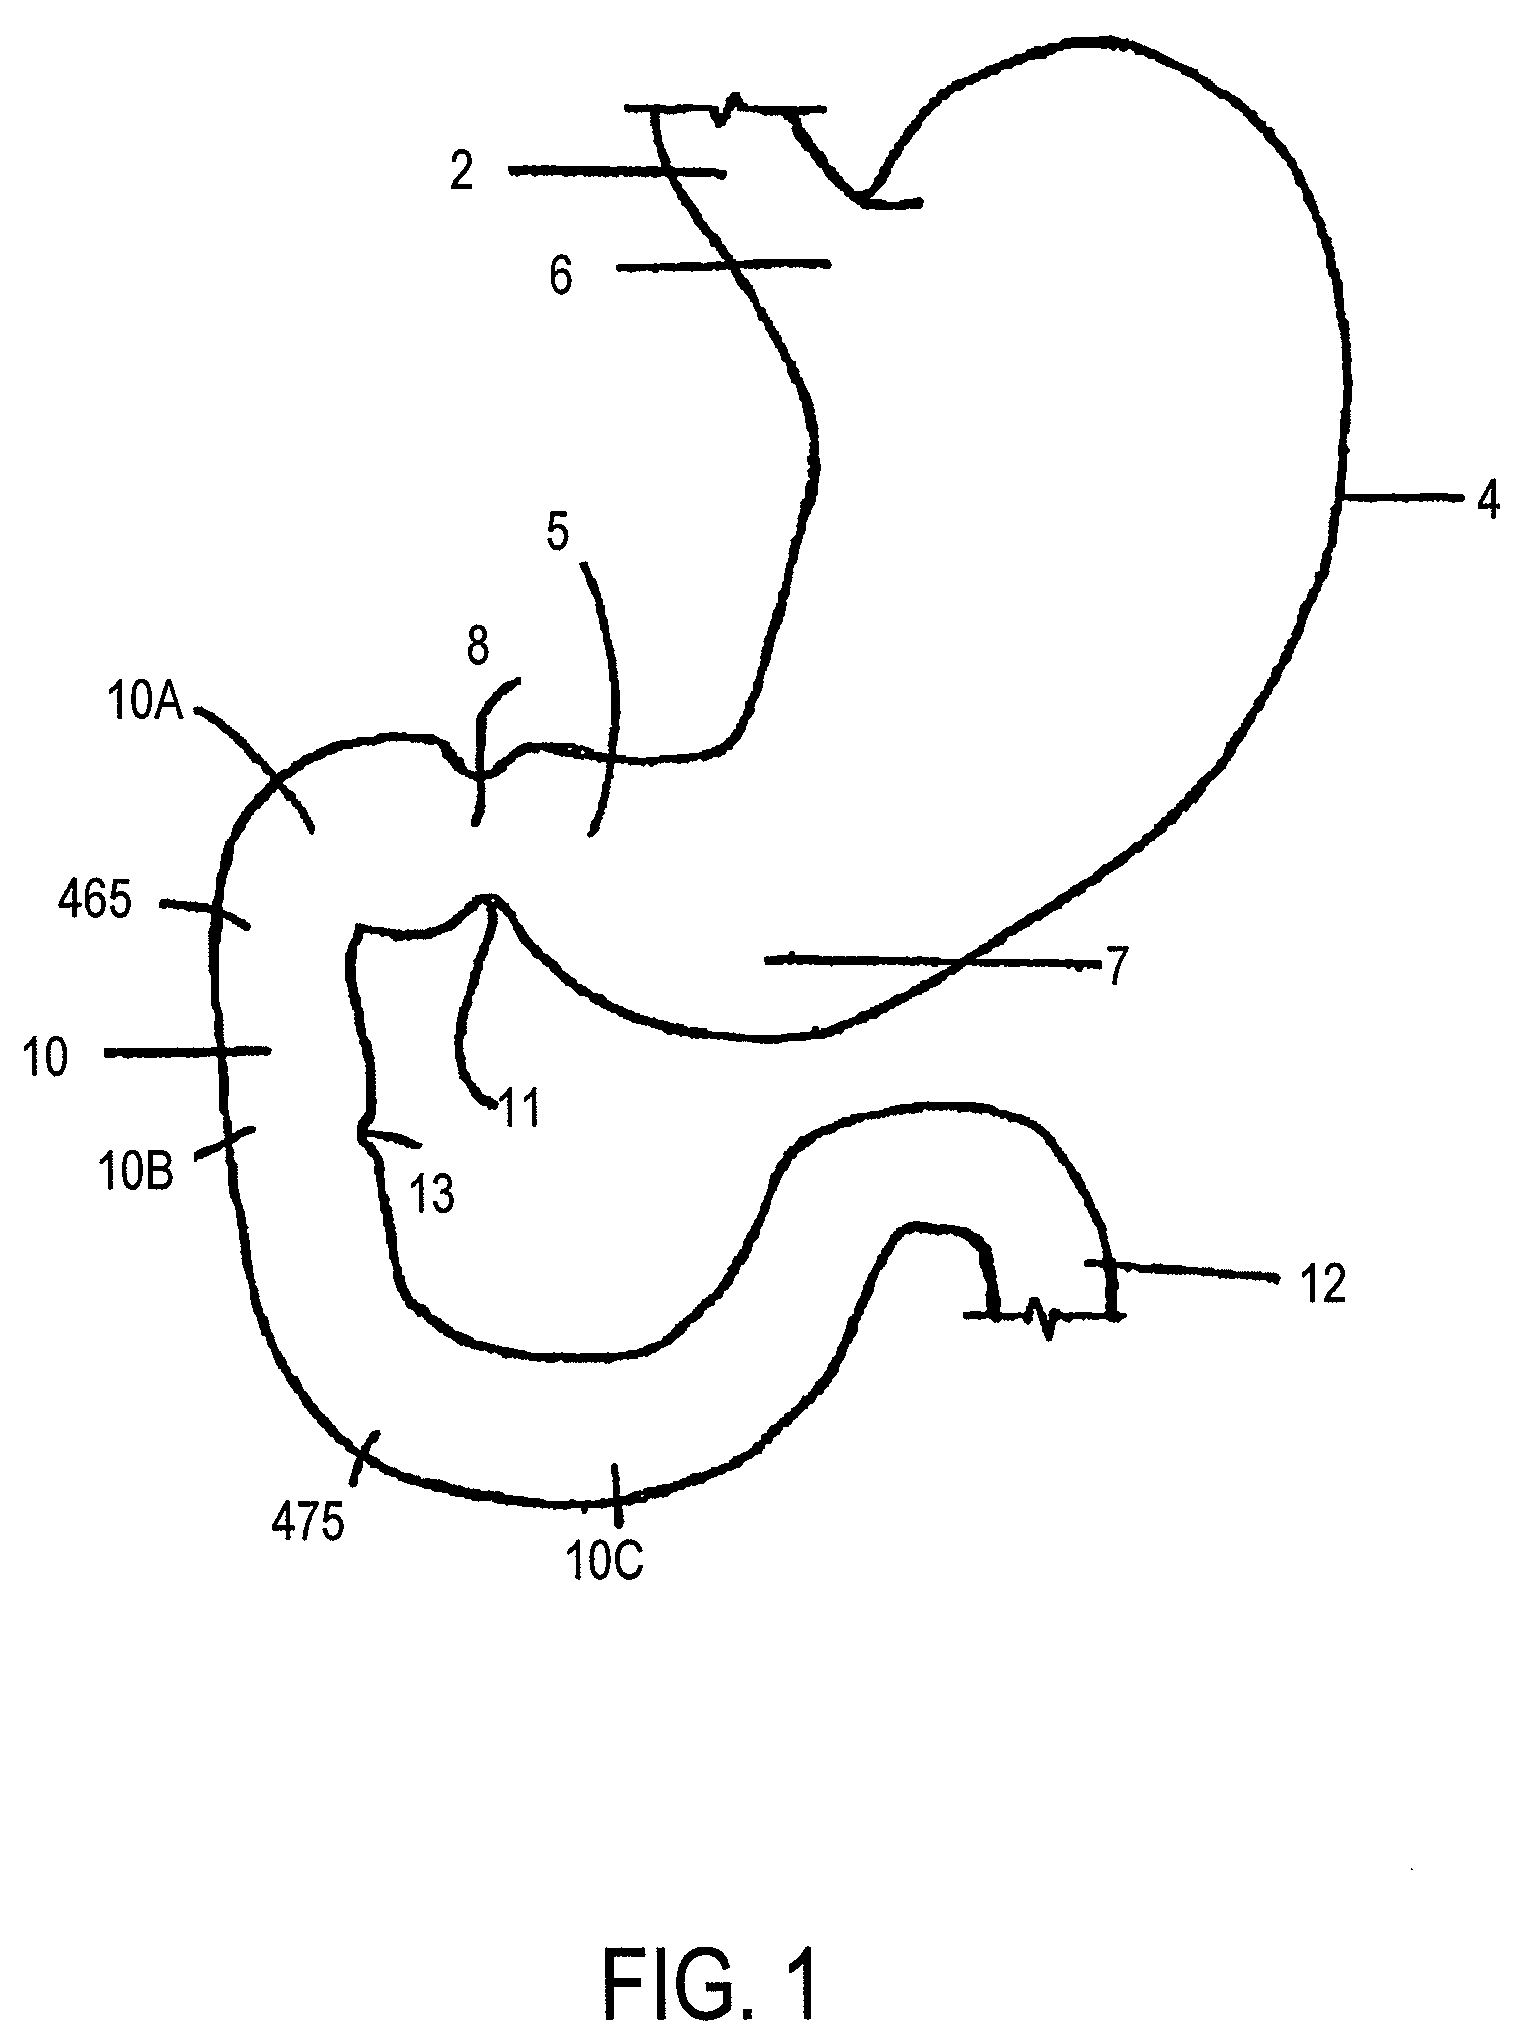 Conformationally-stabilized intraluminal device for medical applications